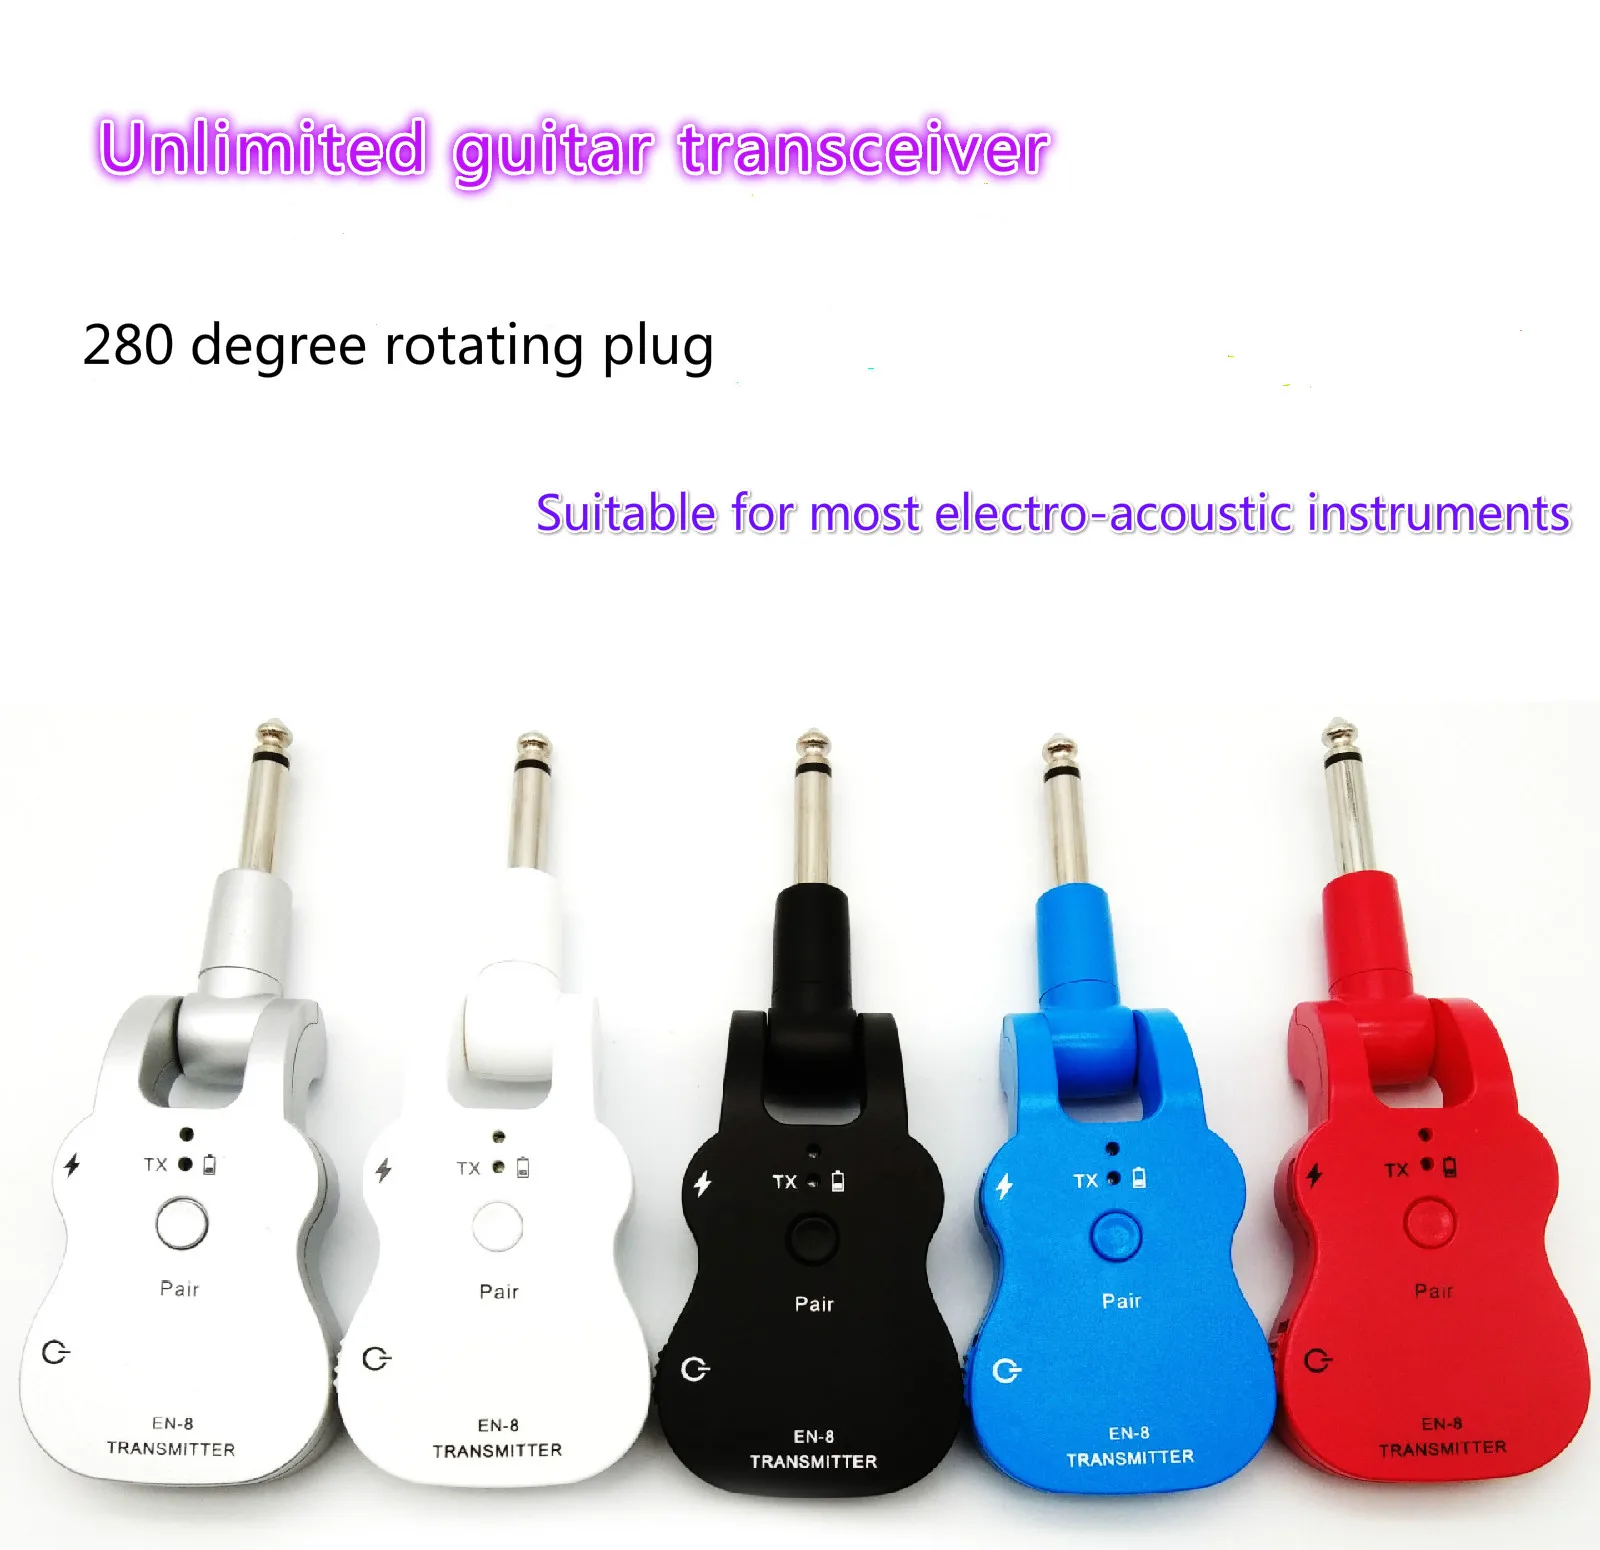 Guitar Wireless Transmitter Receiver Electric Blowpipe Electronic Piano Piano Transceiver Musical Instrument Pickup